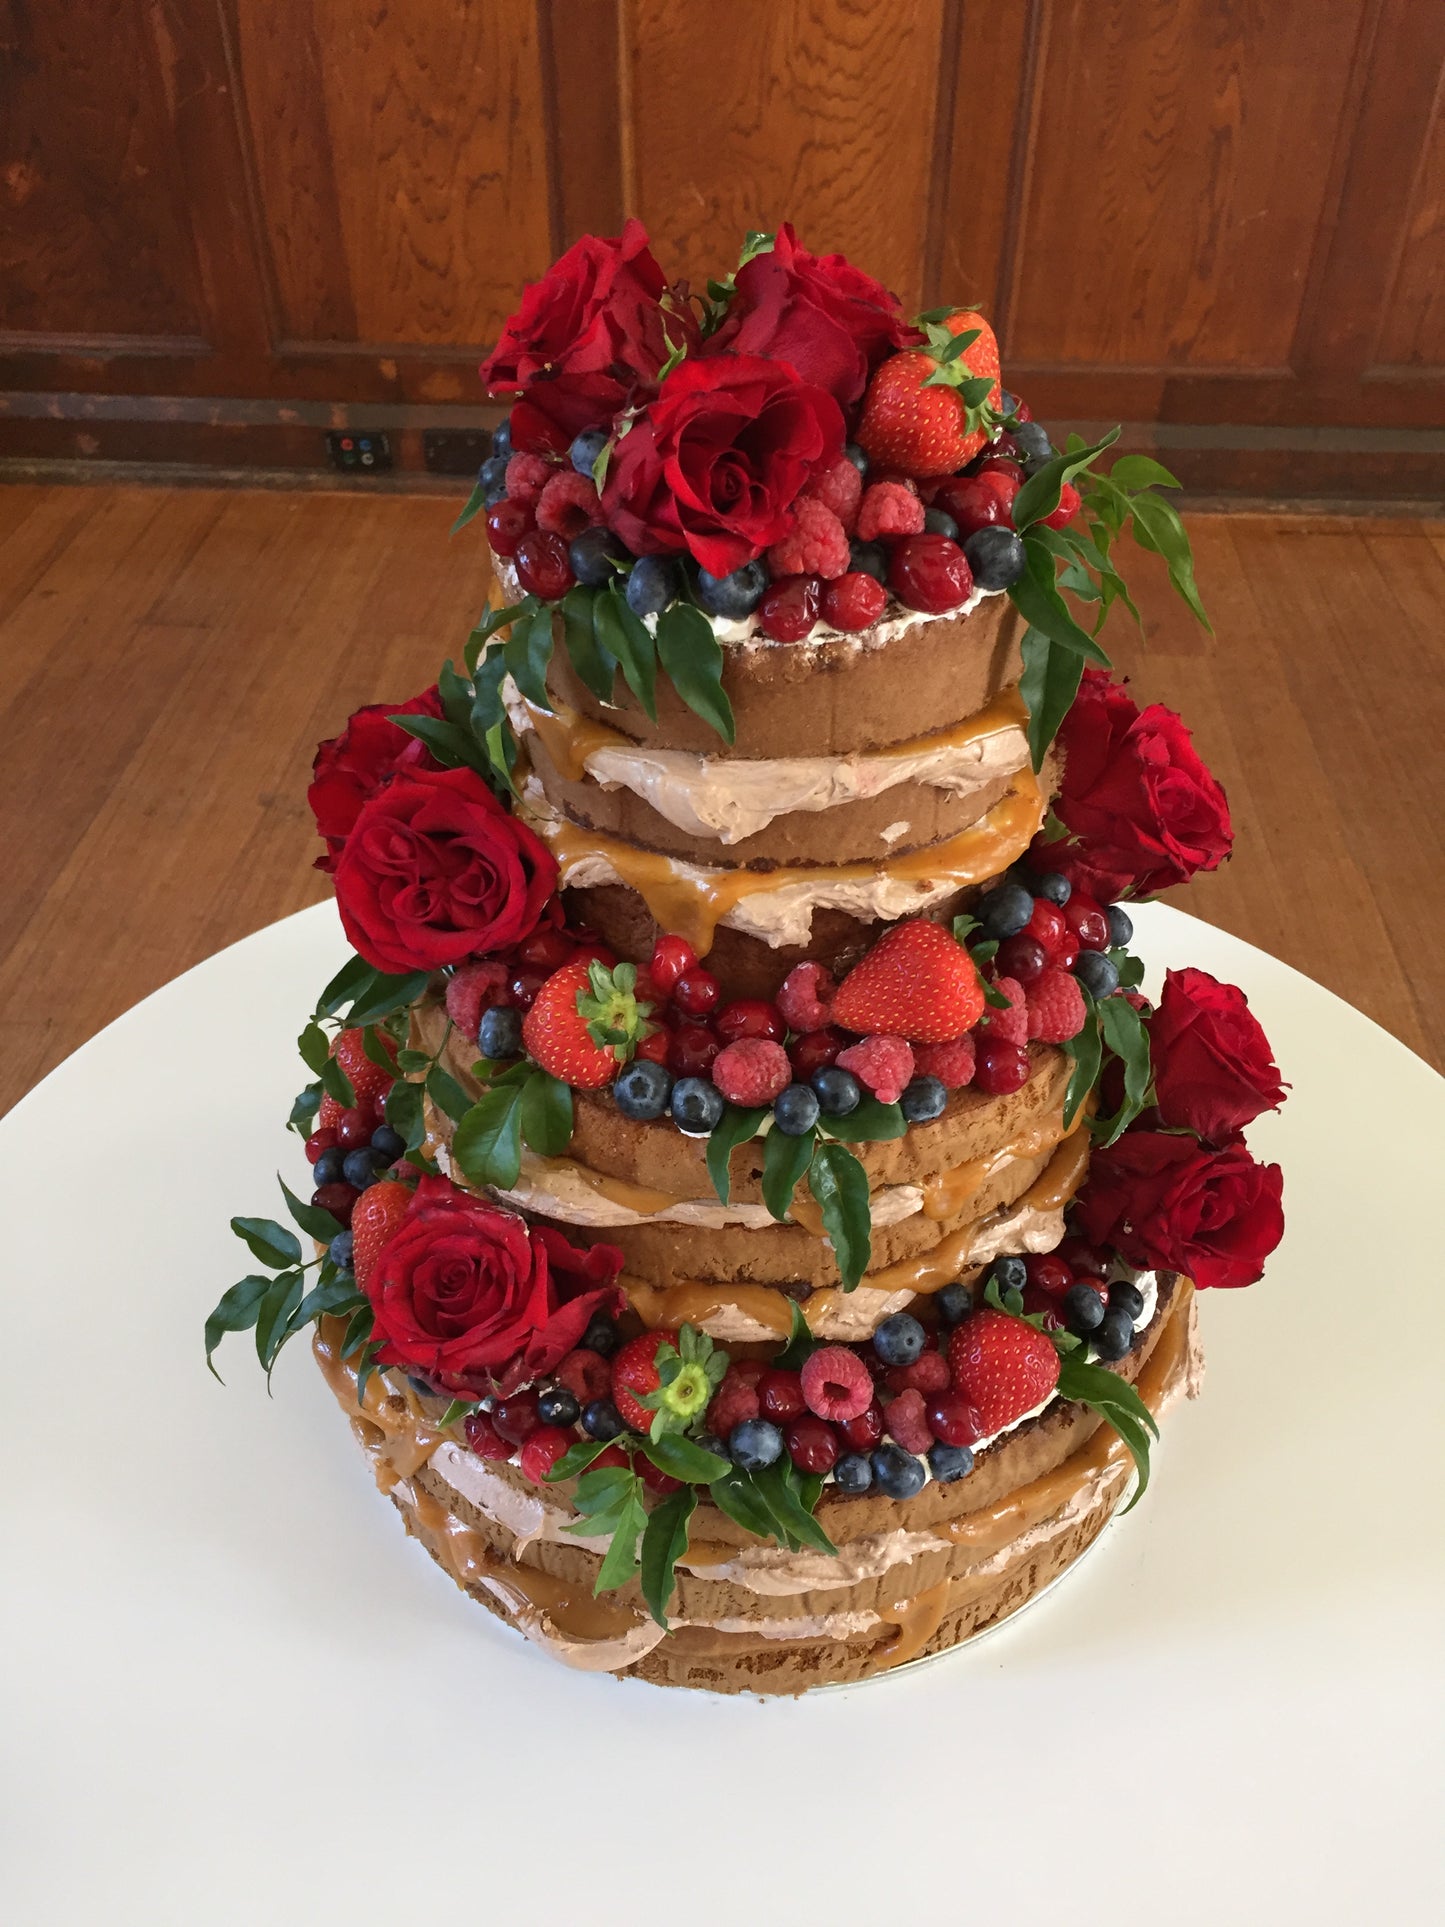 3 Tier Naked Chocolate Cake With Red Flowers & Berries